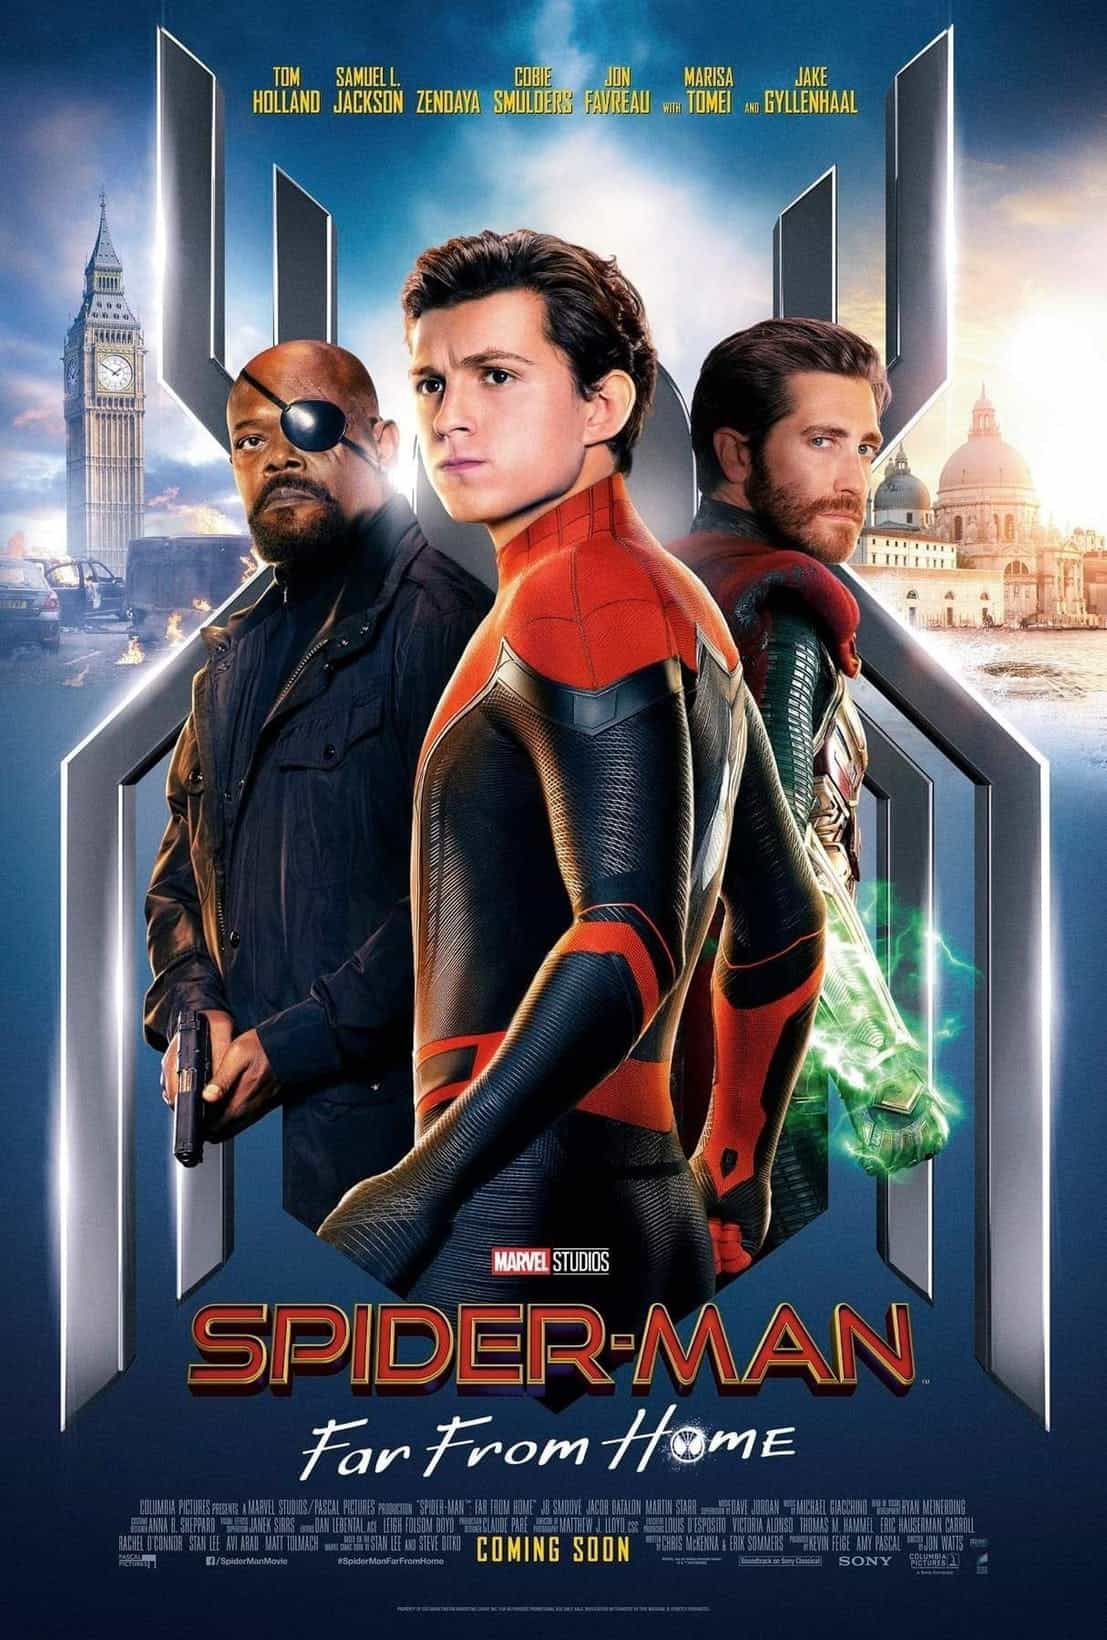 Spider-Man: Far From Home is given a 12A age rating in the UK for moderate fantasy violence, threat, sex references, language